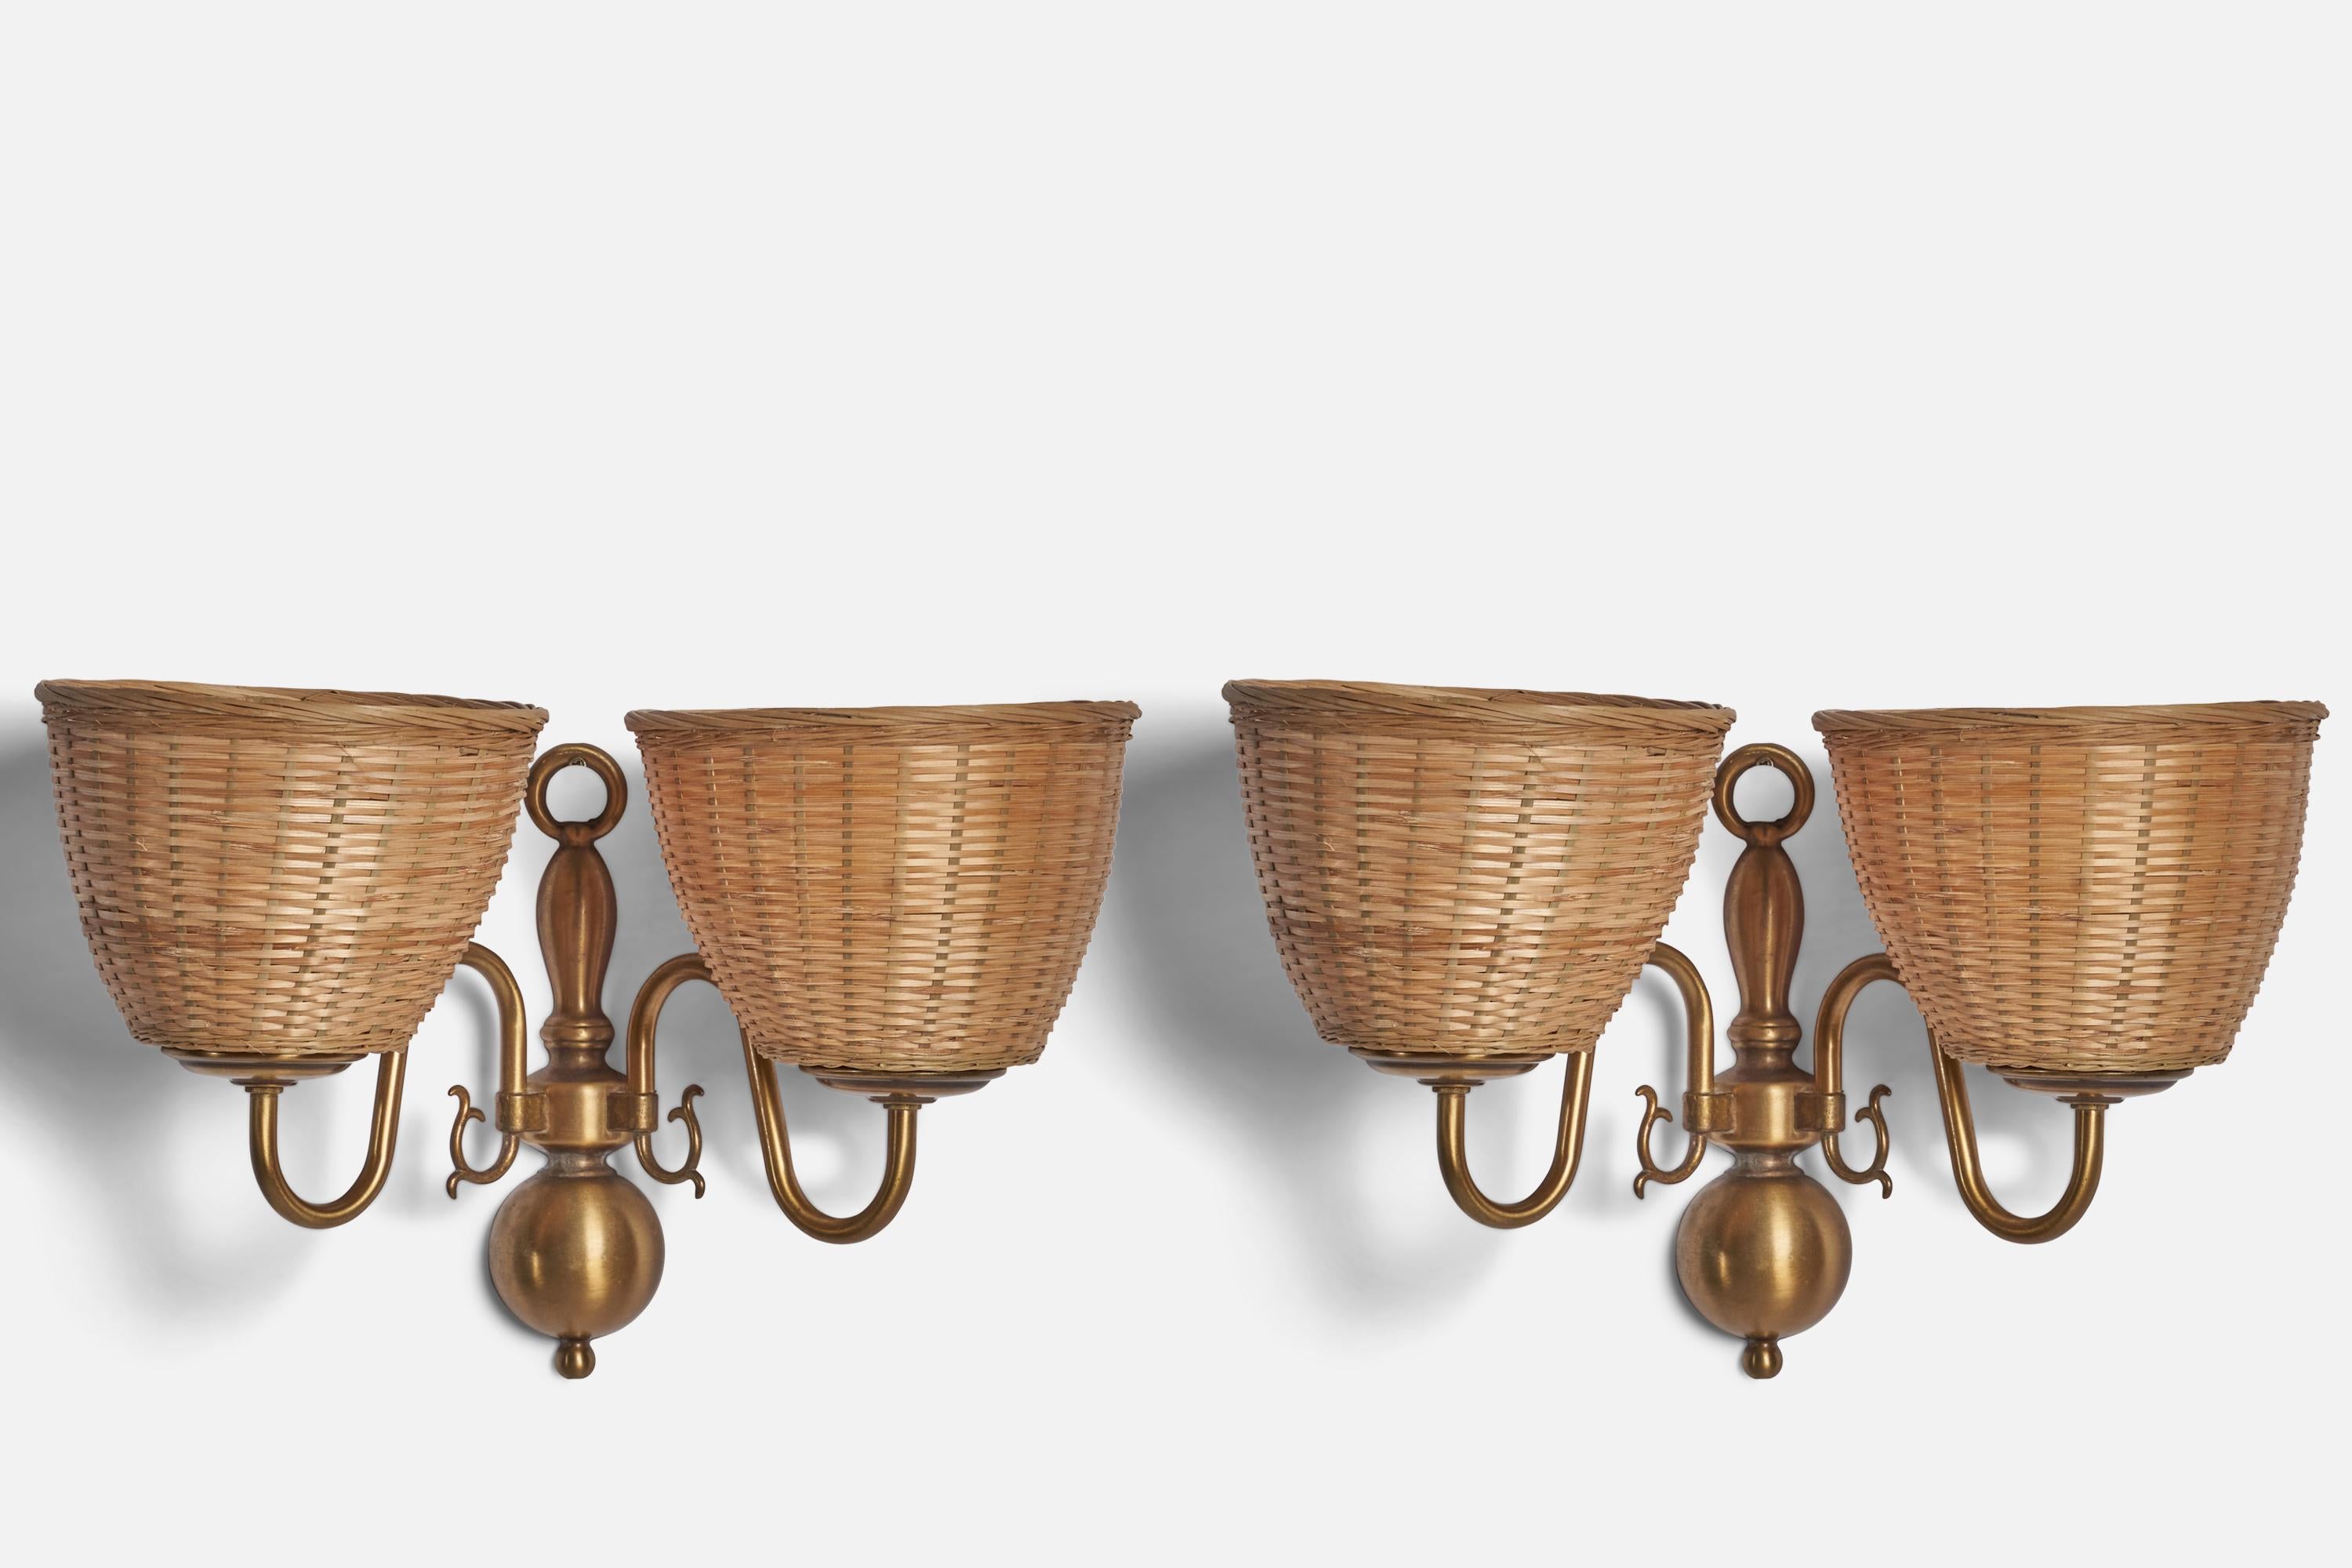 A pair of brass and rattan wall lights designed and produced in Sweden, c. 1970s.

Overall Dimensions (inches): 9.25” H x 14.25” W x 7.5” D
Back Plate Dimensions (inches): 8.75” H x 2.5” W x 1.25” D
Bulb Specifications: E-12 Bulb
Number of Sockets: